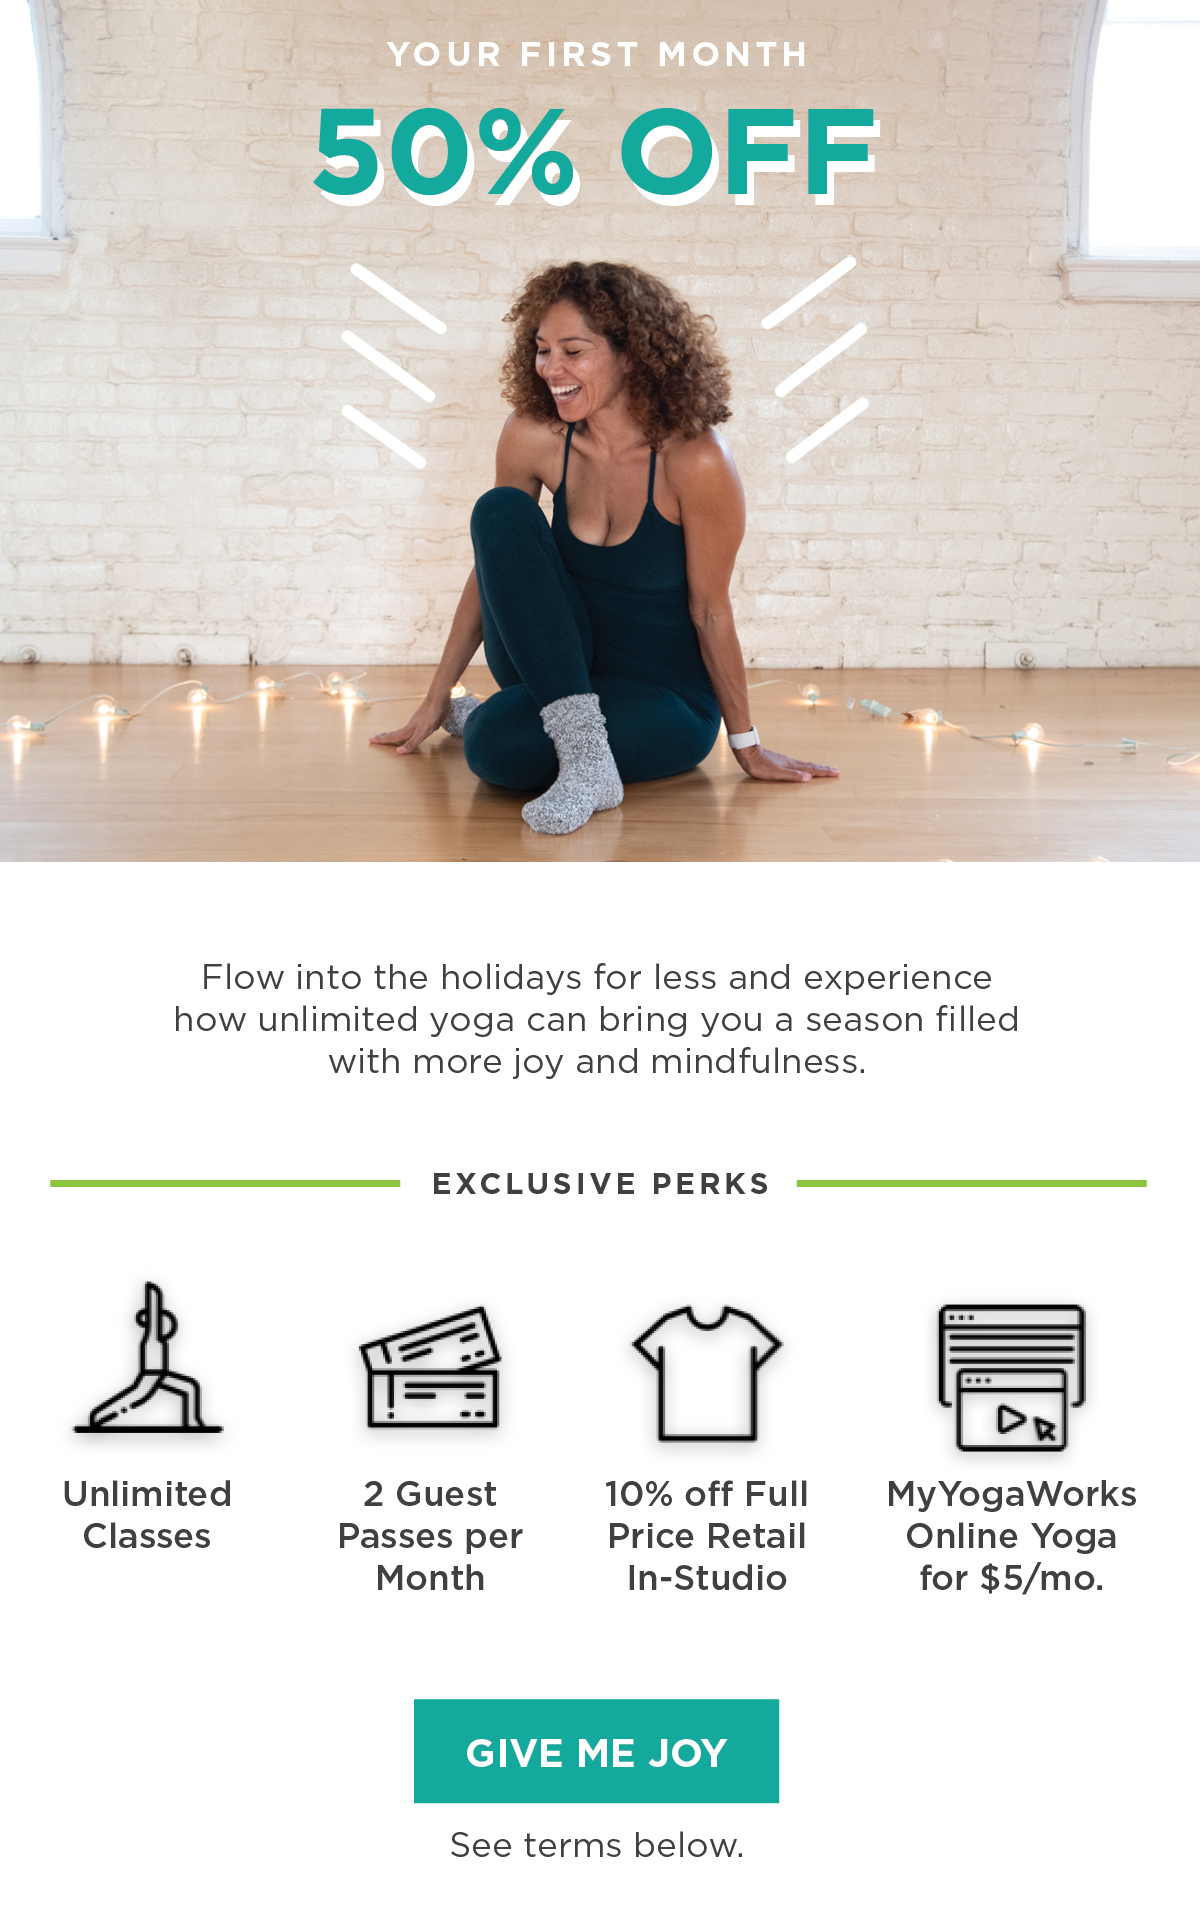 50% off your first month of unlimited yoga!